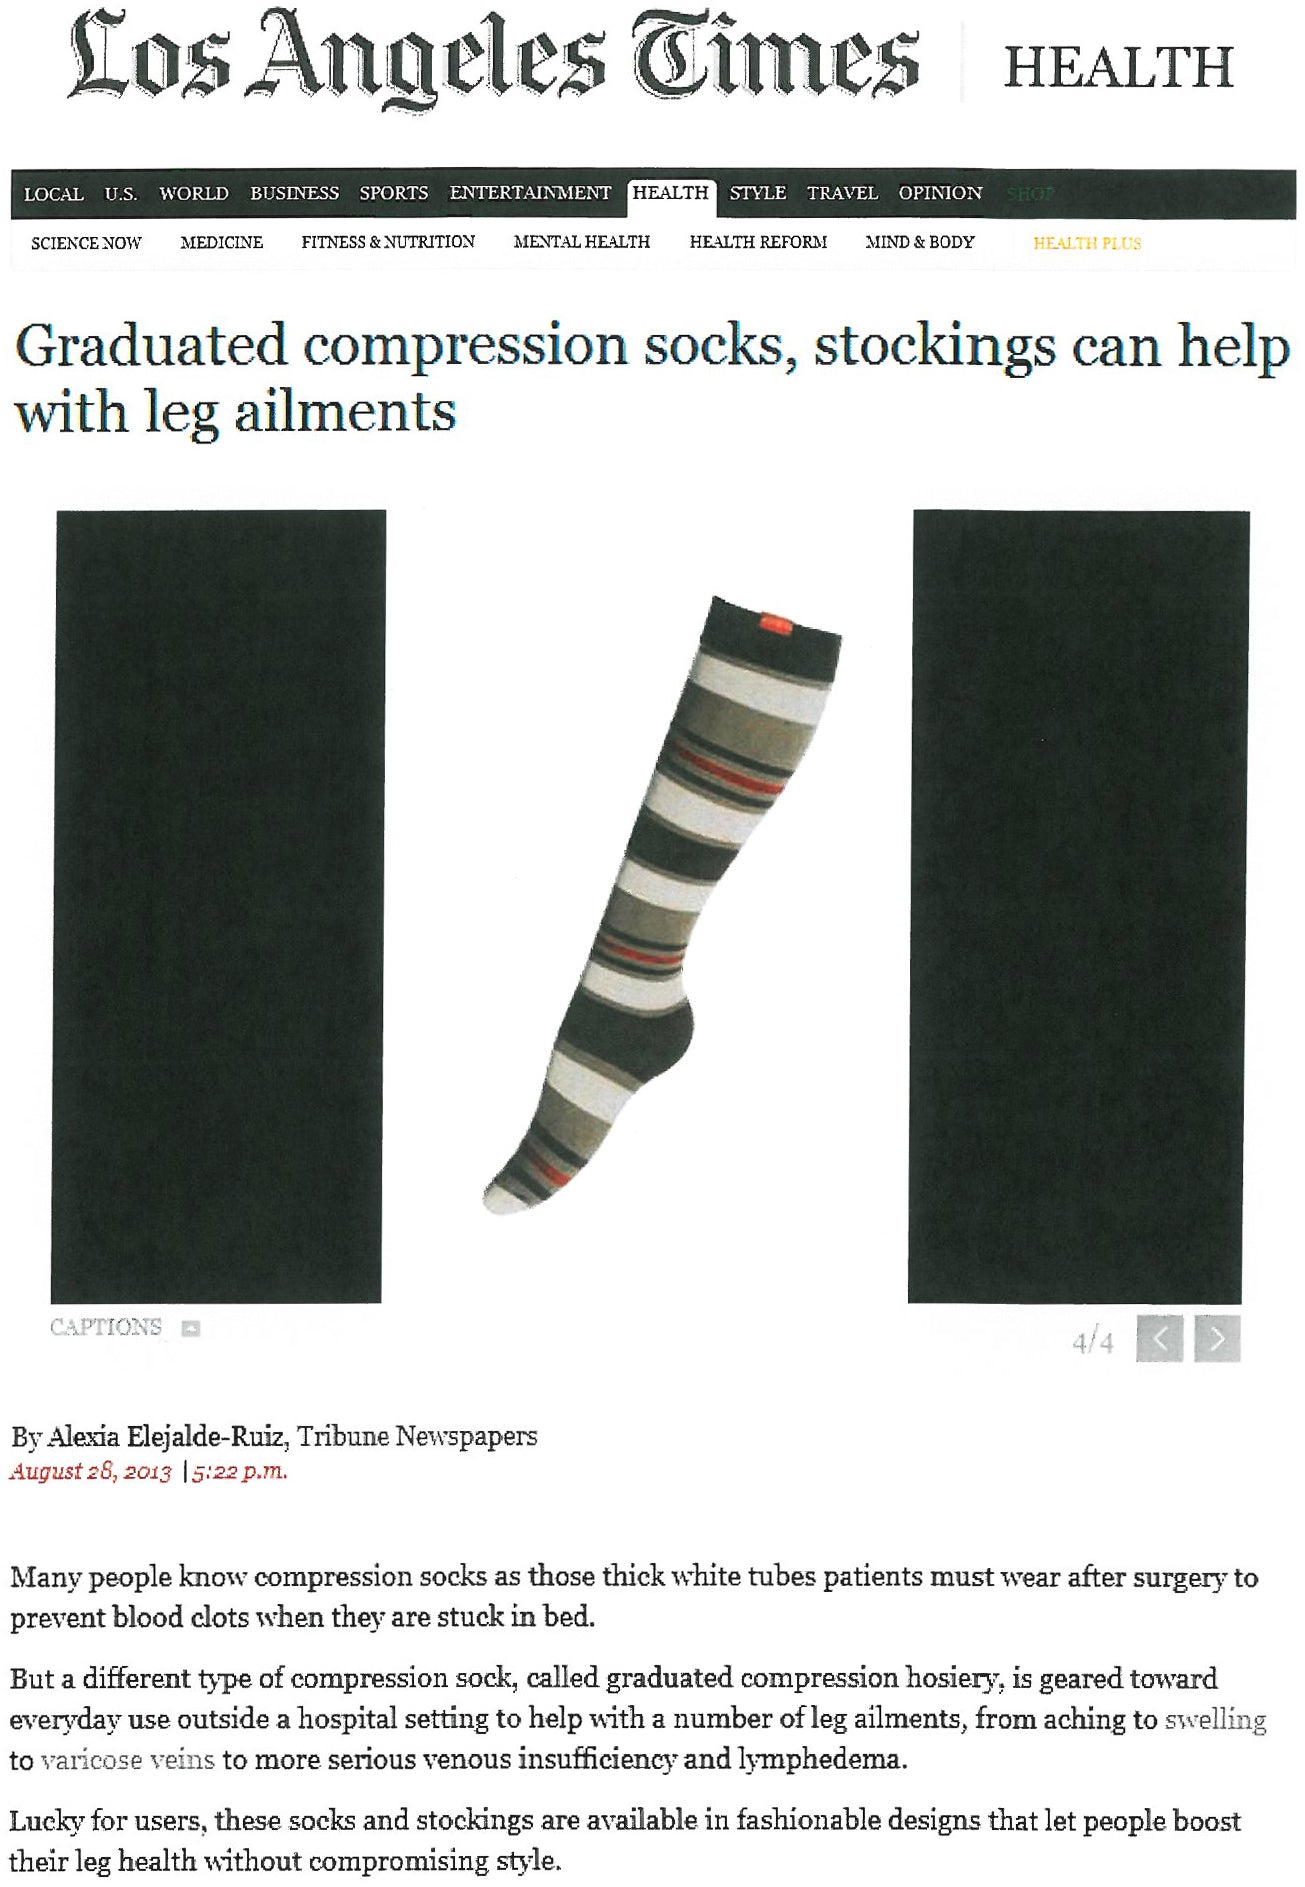 An article of Los Angeles Times which recommends VIM & VIGR Compression Socks as "Lucky for users, as these socks and stockings are available in fashionable designs that let people boost their leg health without compromising style."